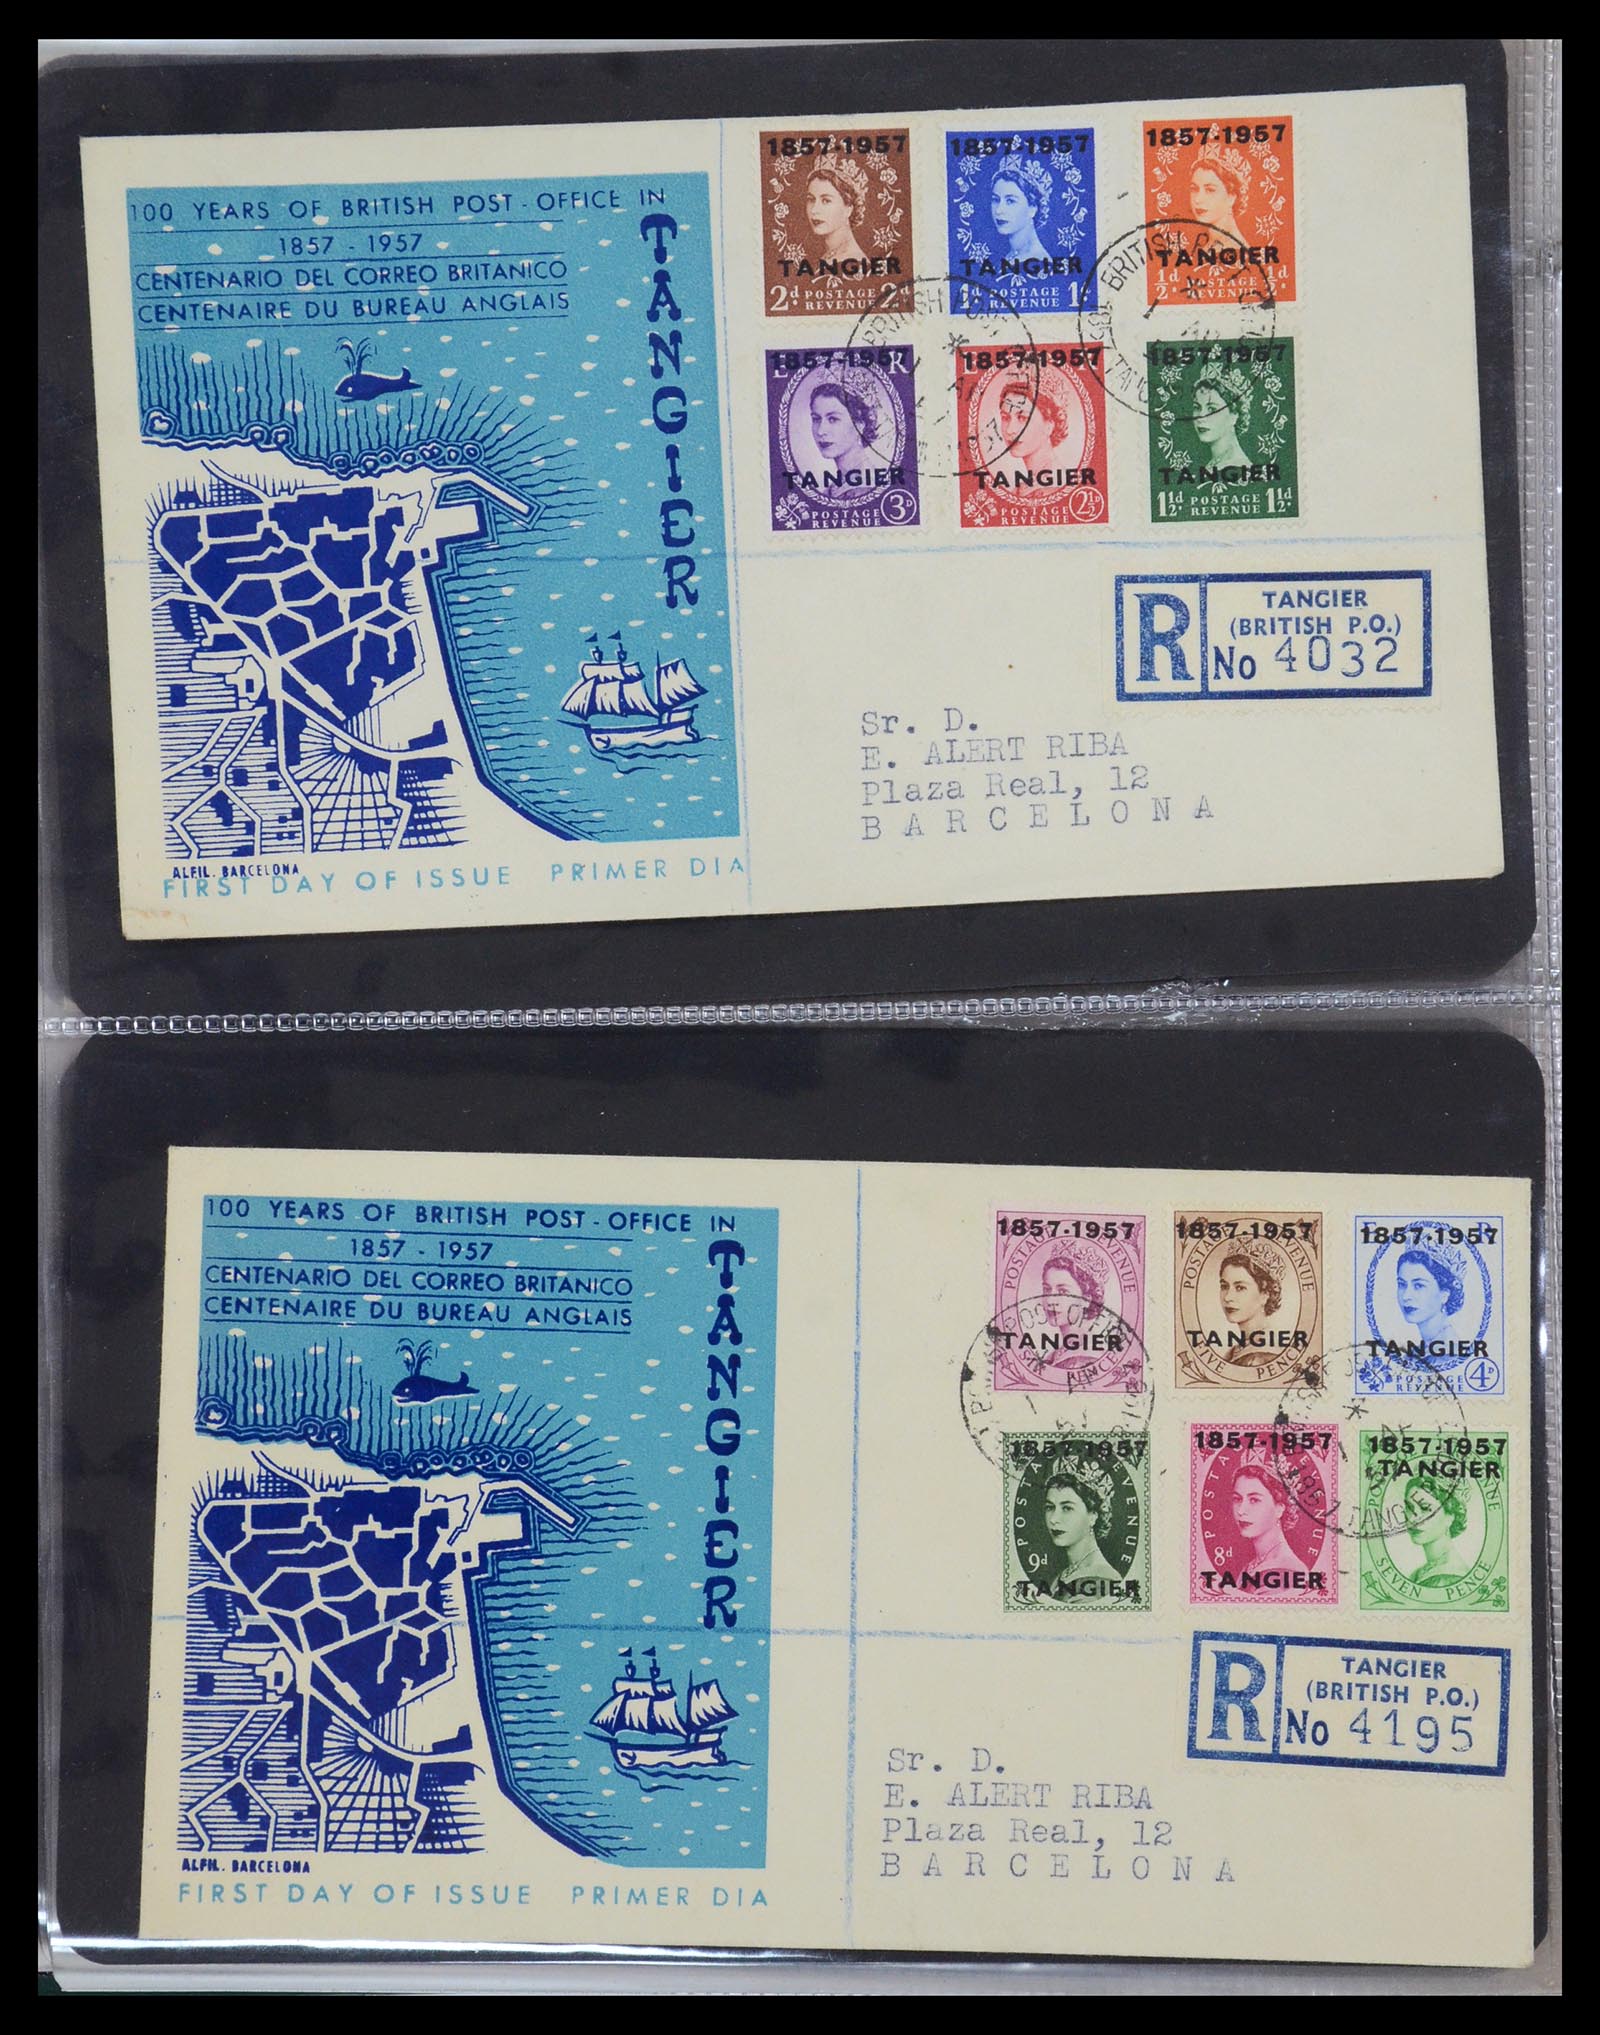 35736 048 - Stamp Collection 35736 World airmail covers.